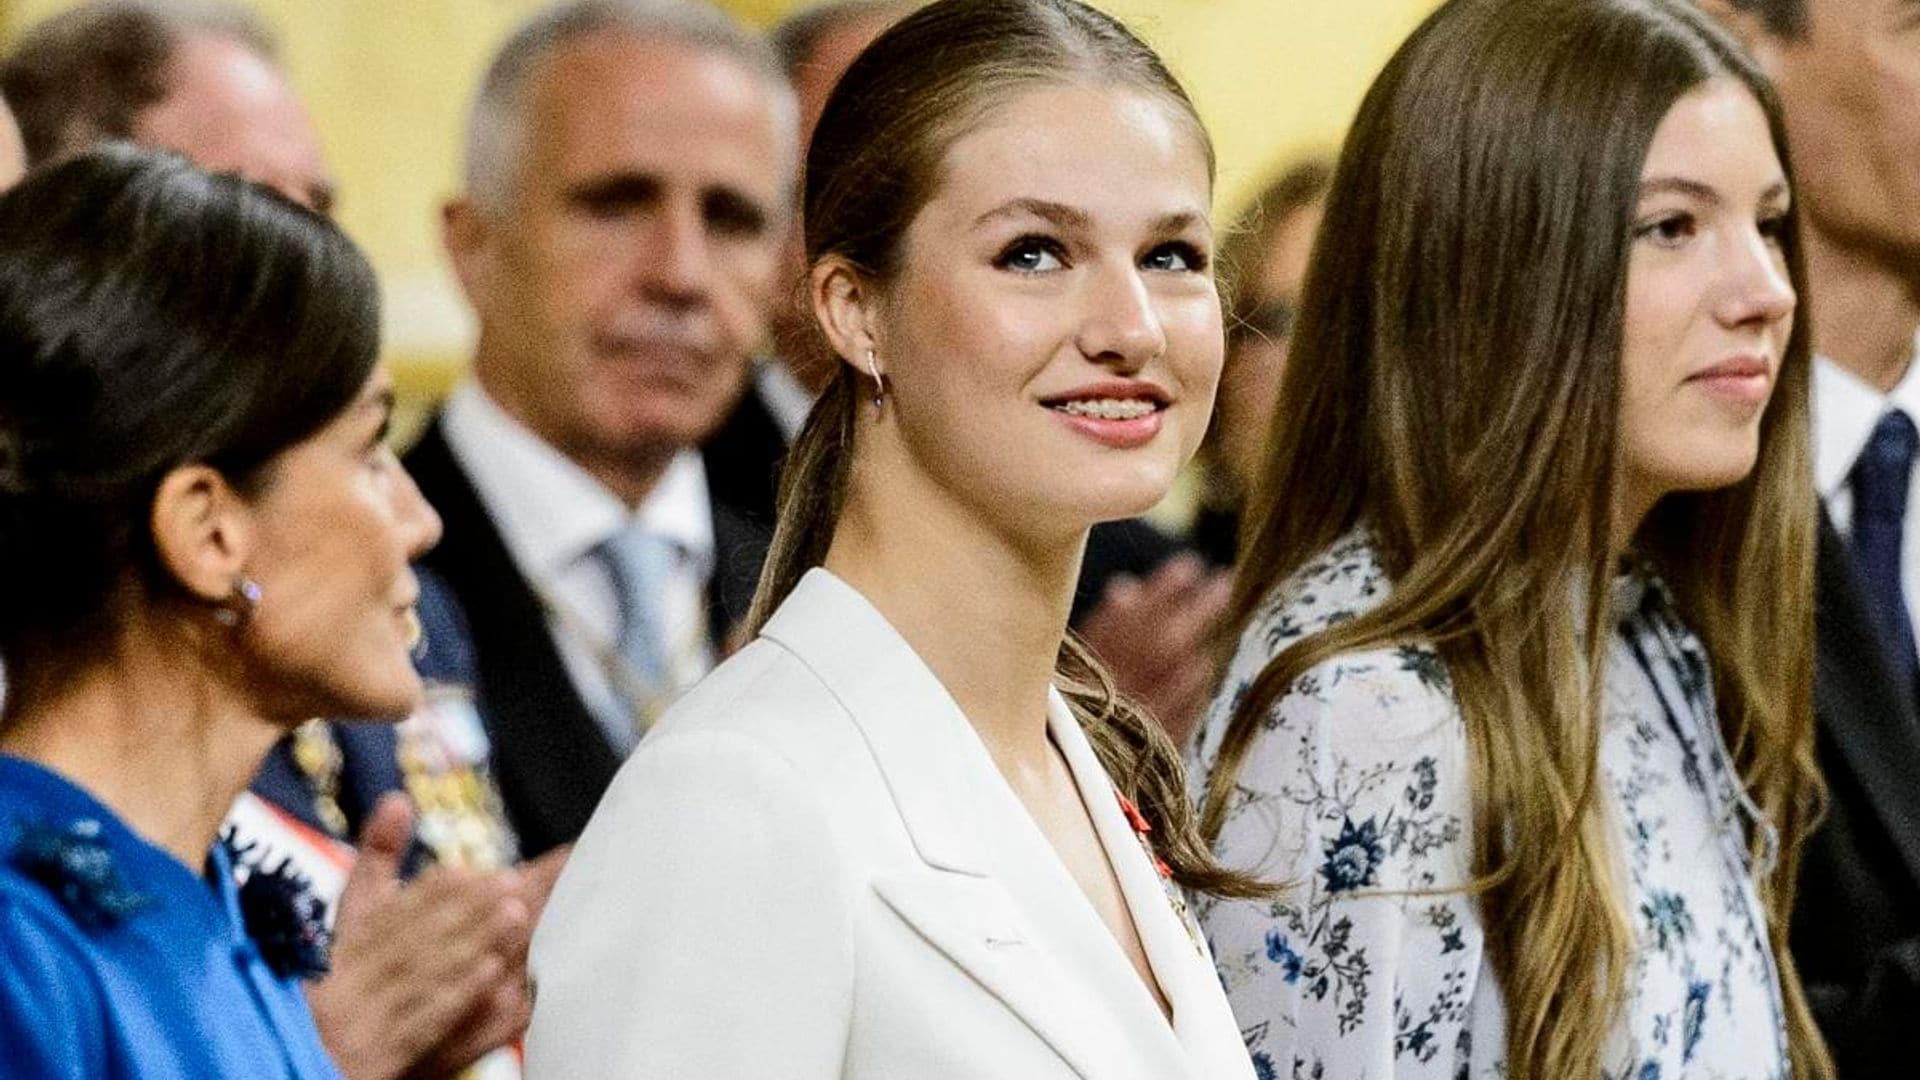 What Princess Leonor asked for in her birthday speech